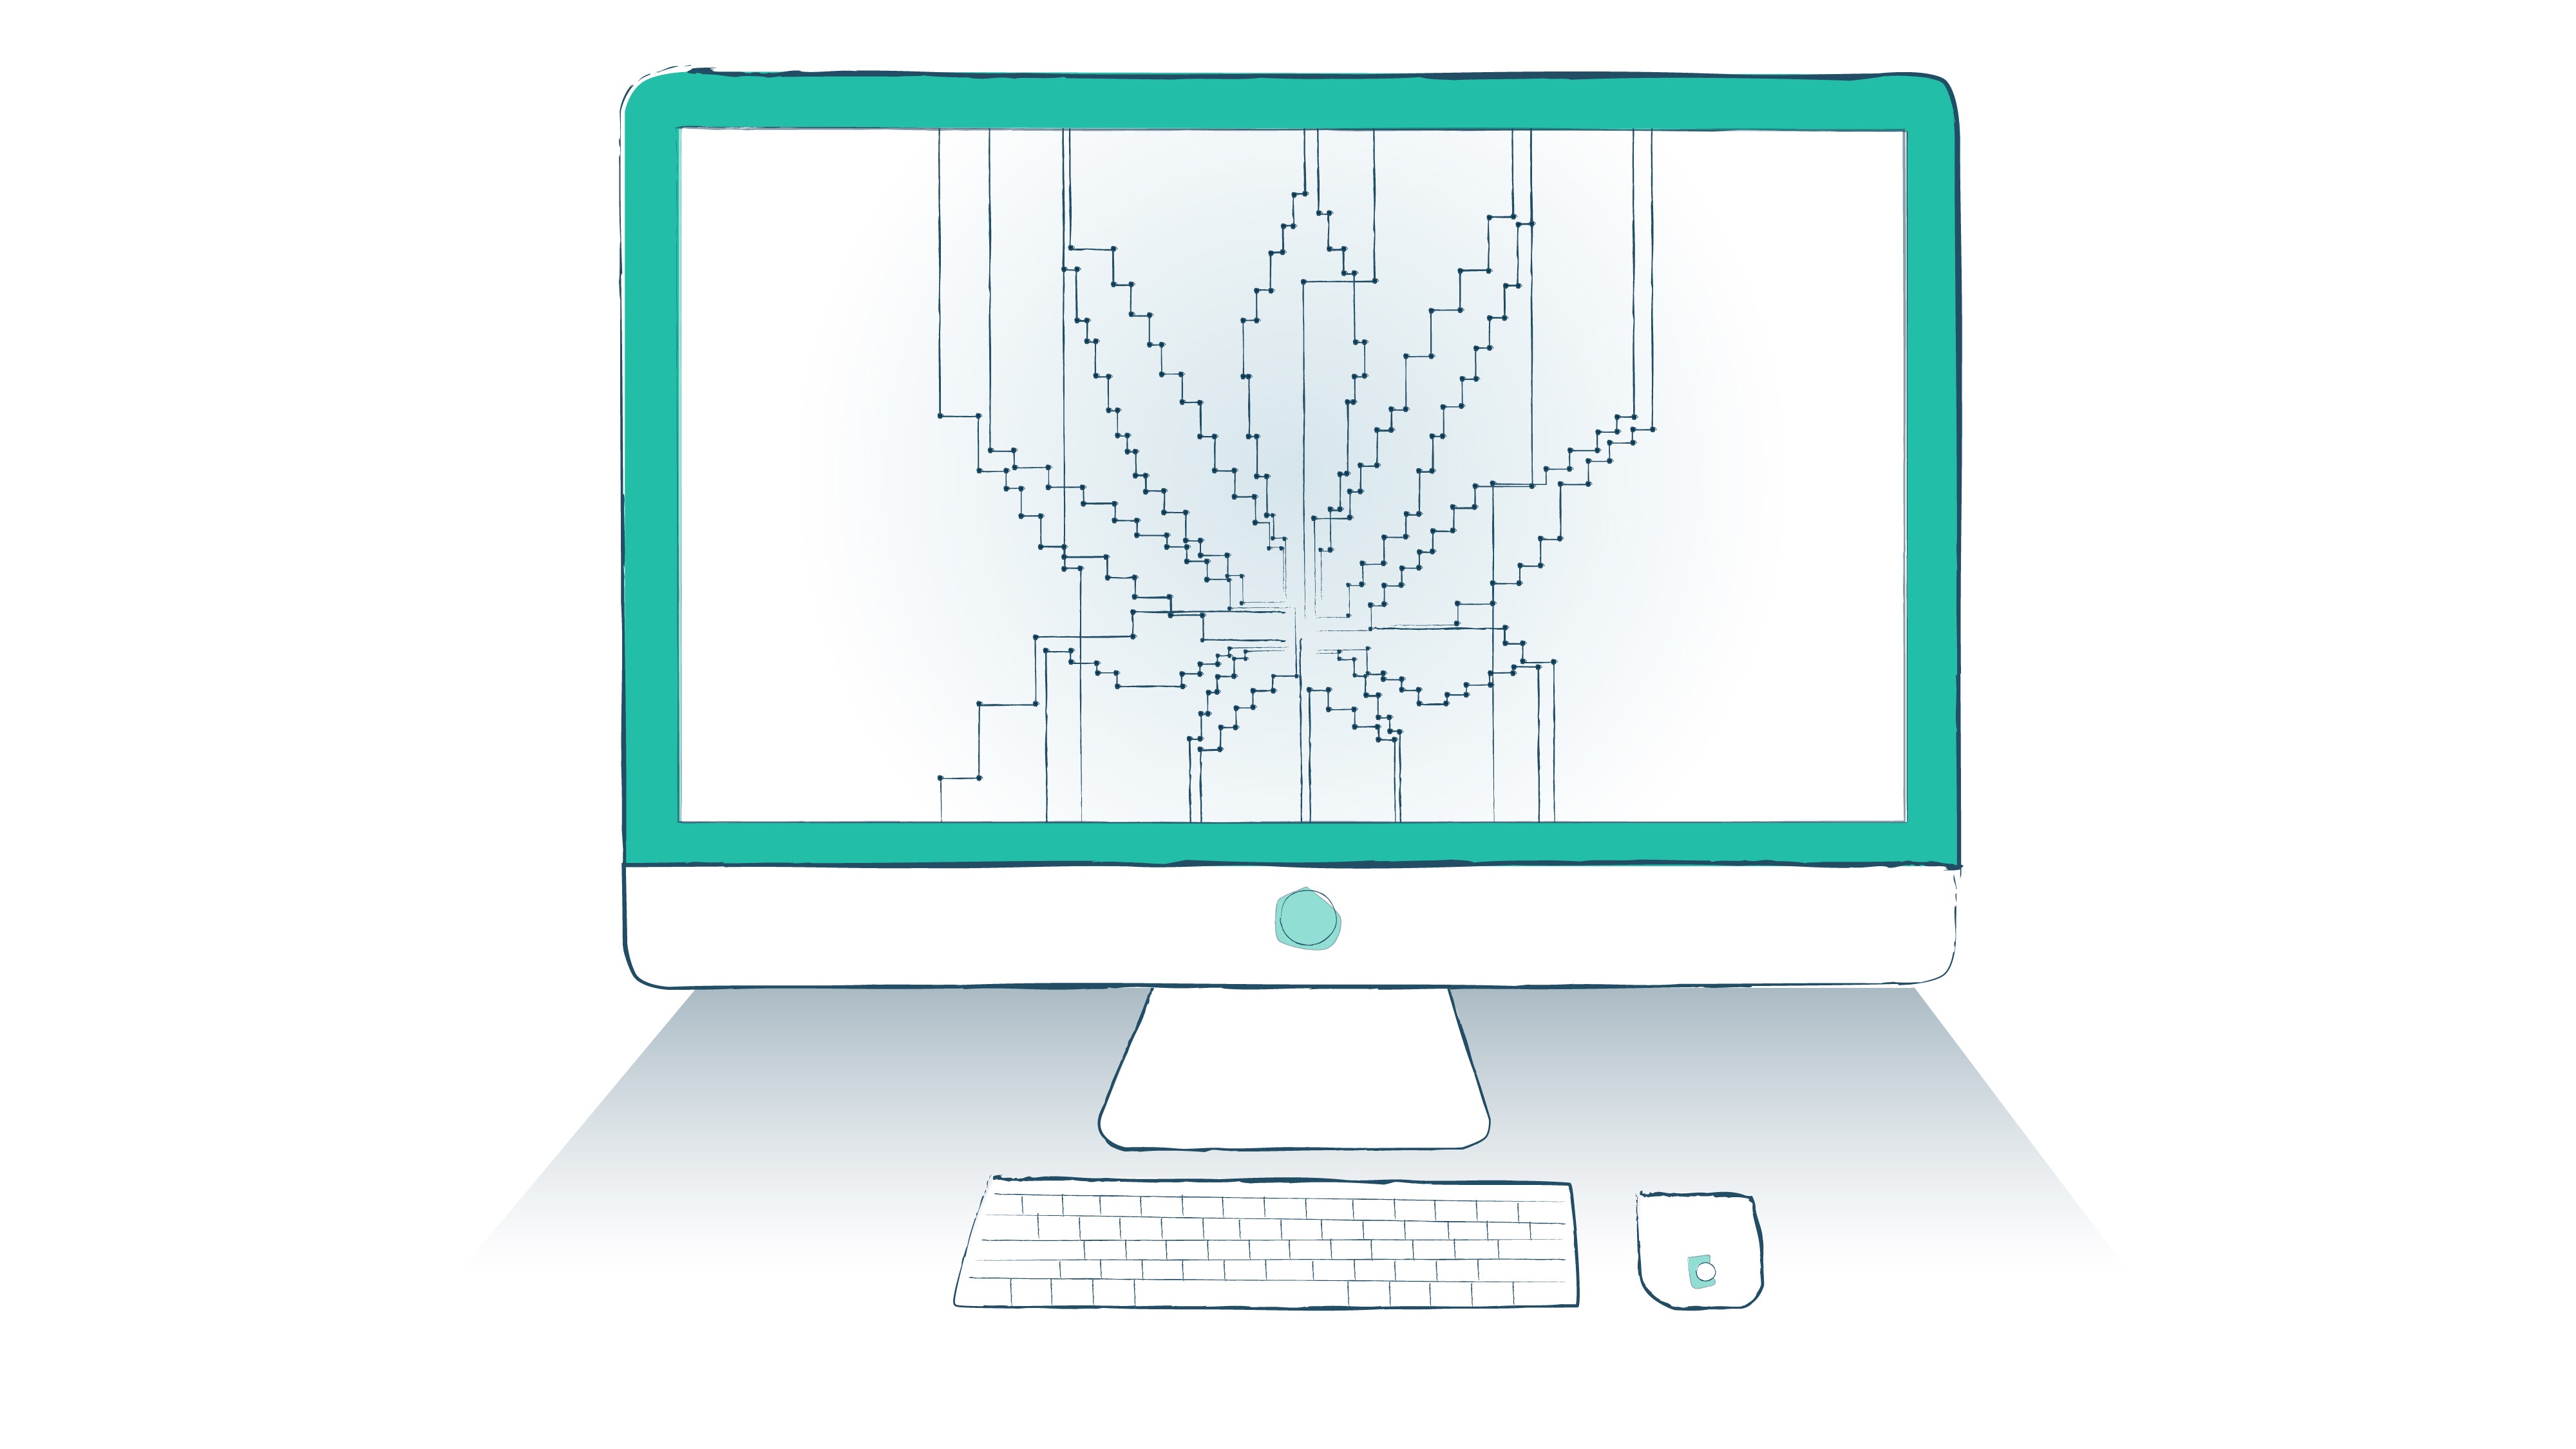 What You Need To Know About Vangst's New, Free Cannabis Recruitment Platform